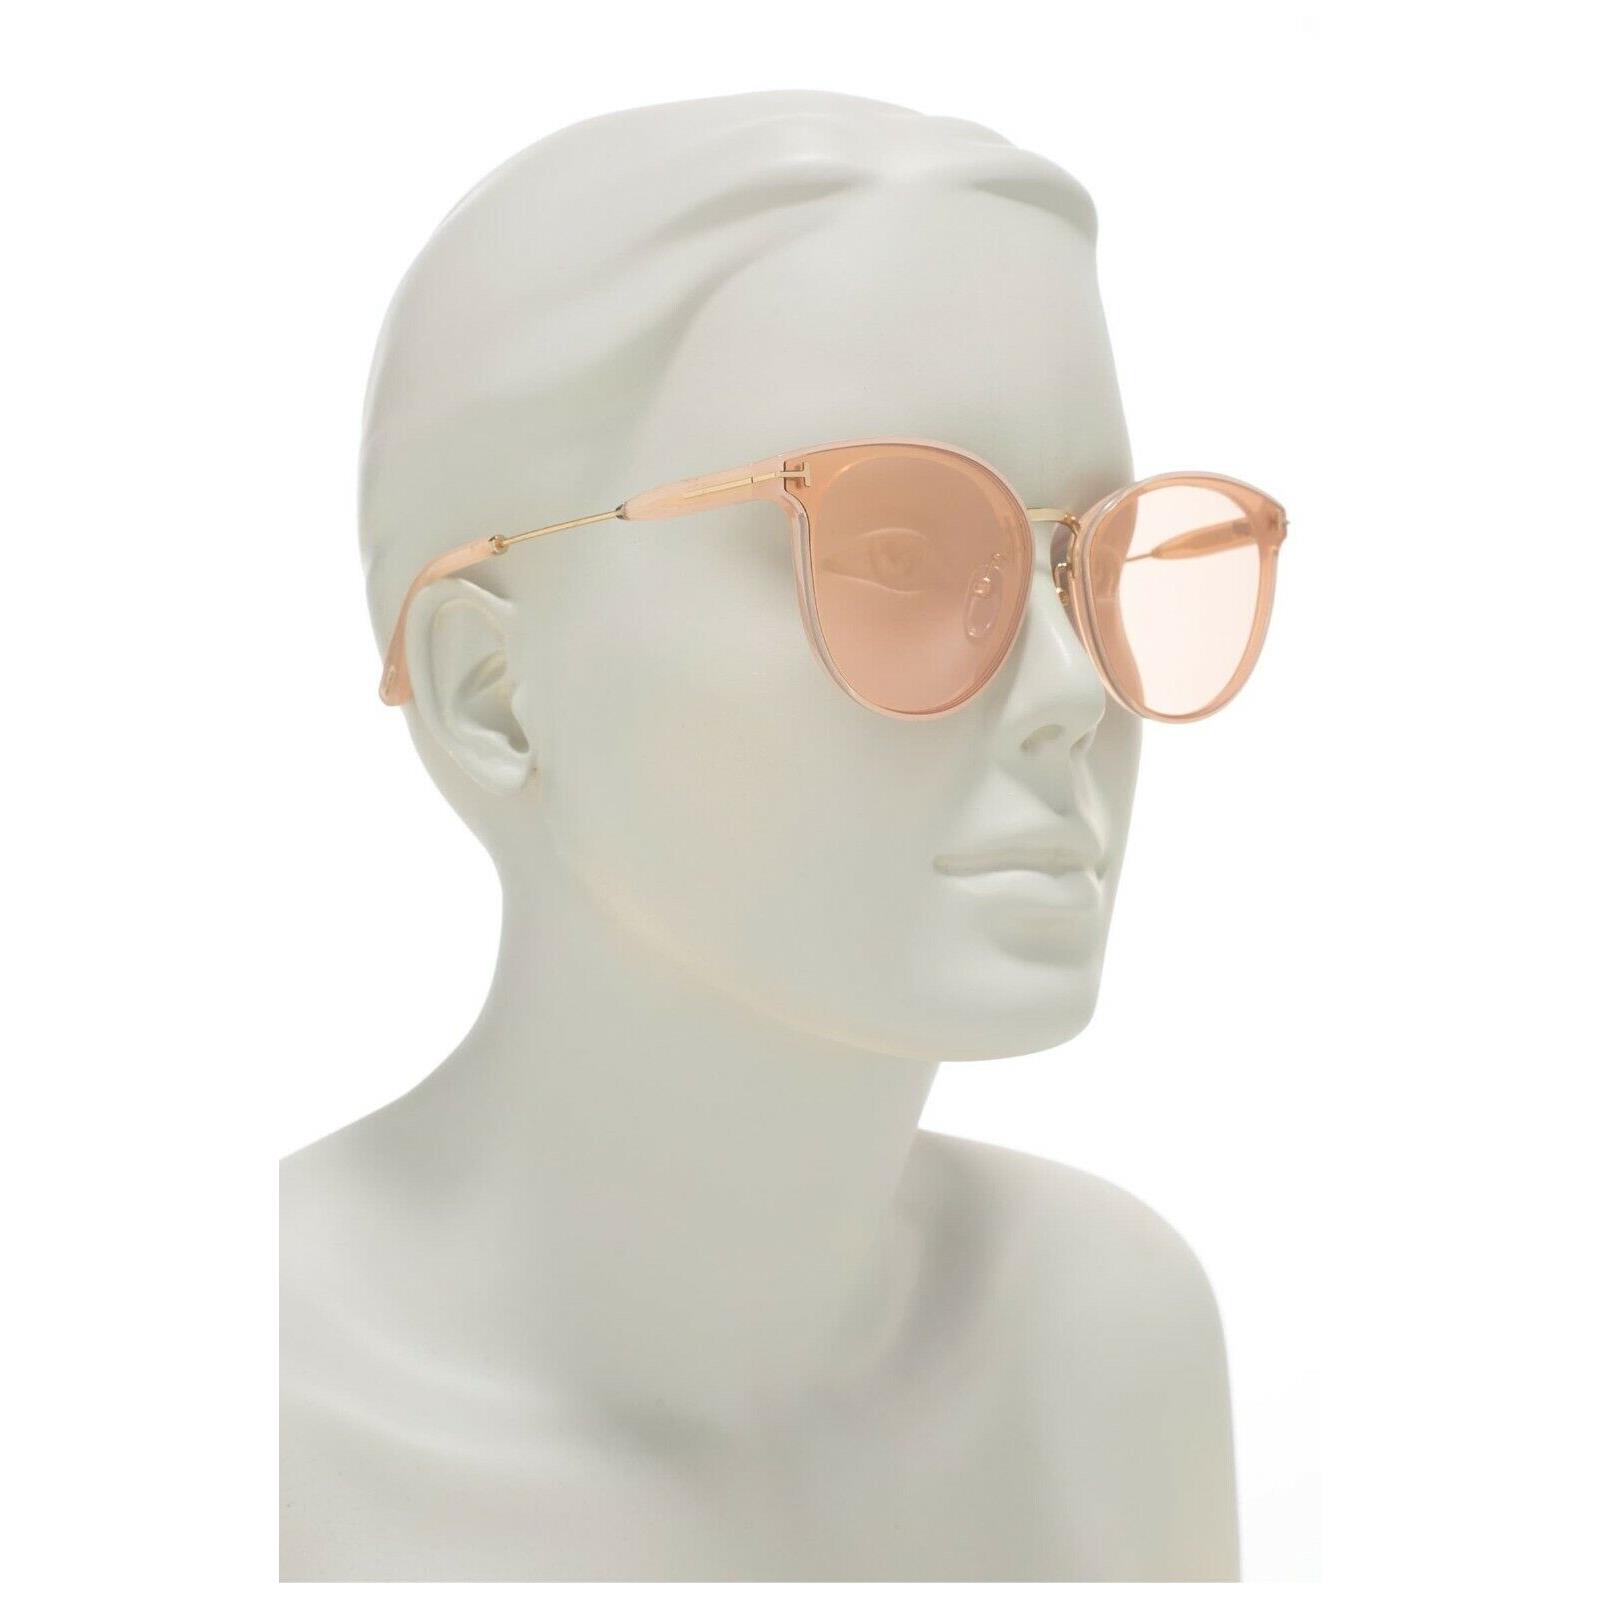 Tom Ford TF725K 74G Clear Pink/gold Mirror Pink Injected Round Sunglasses.  63 mm